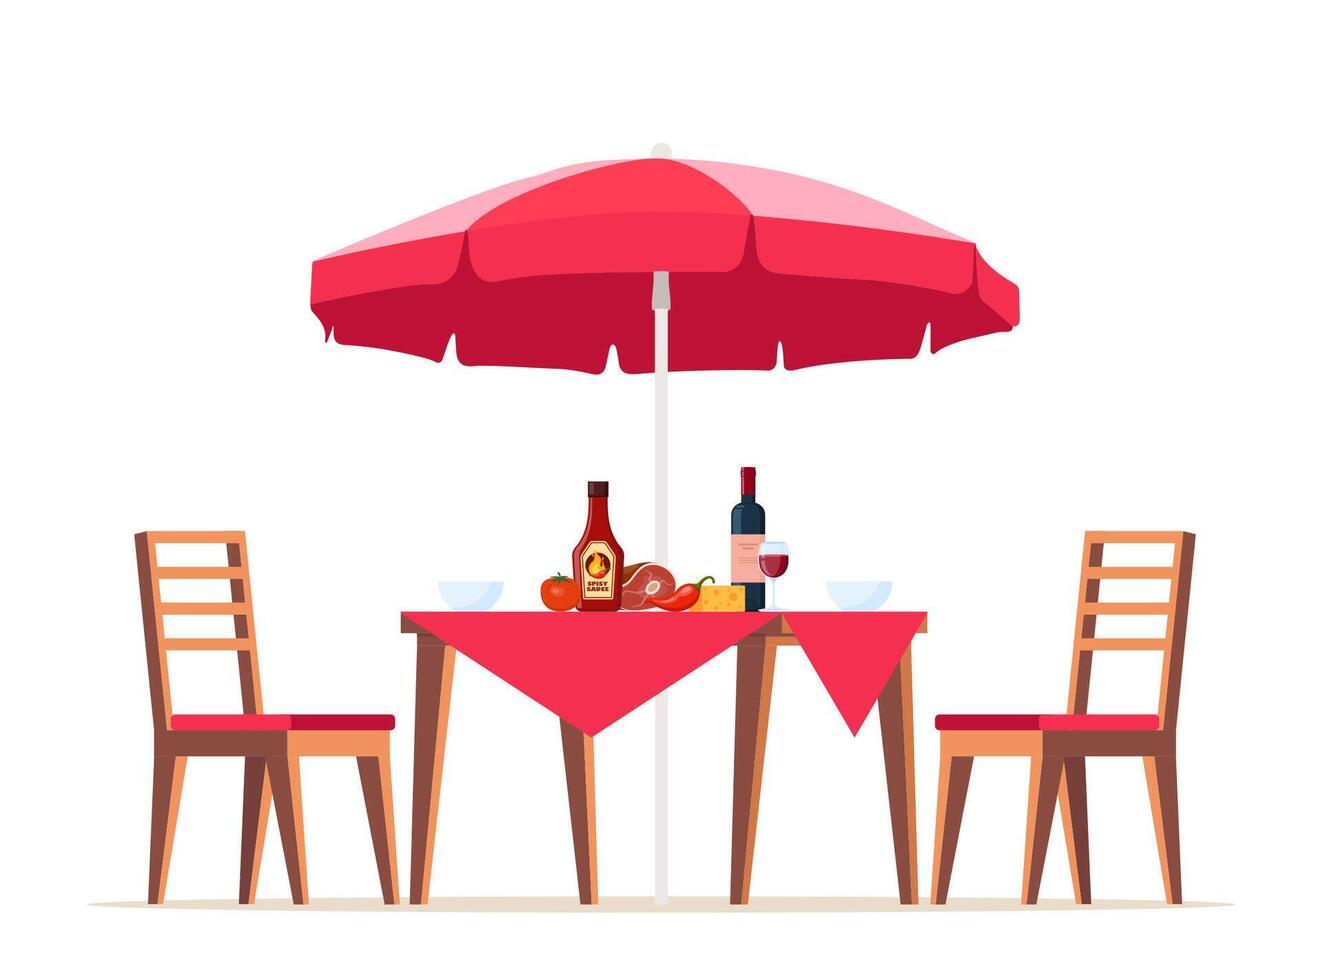 Summer picnic table covered with a tablecloth, chairs and umbrella. Food on the table for family barbecue, picnic, grill party. Vector illustration.